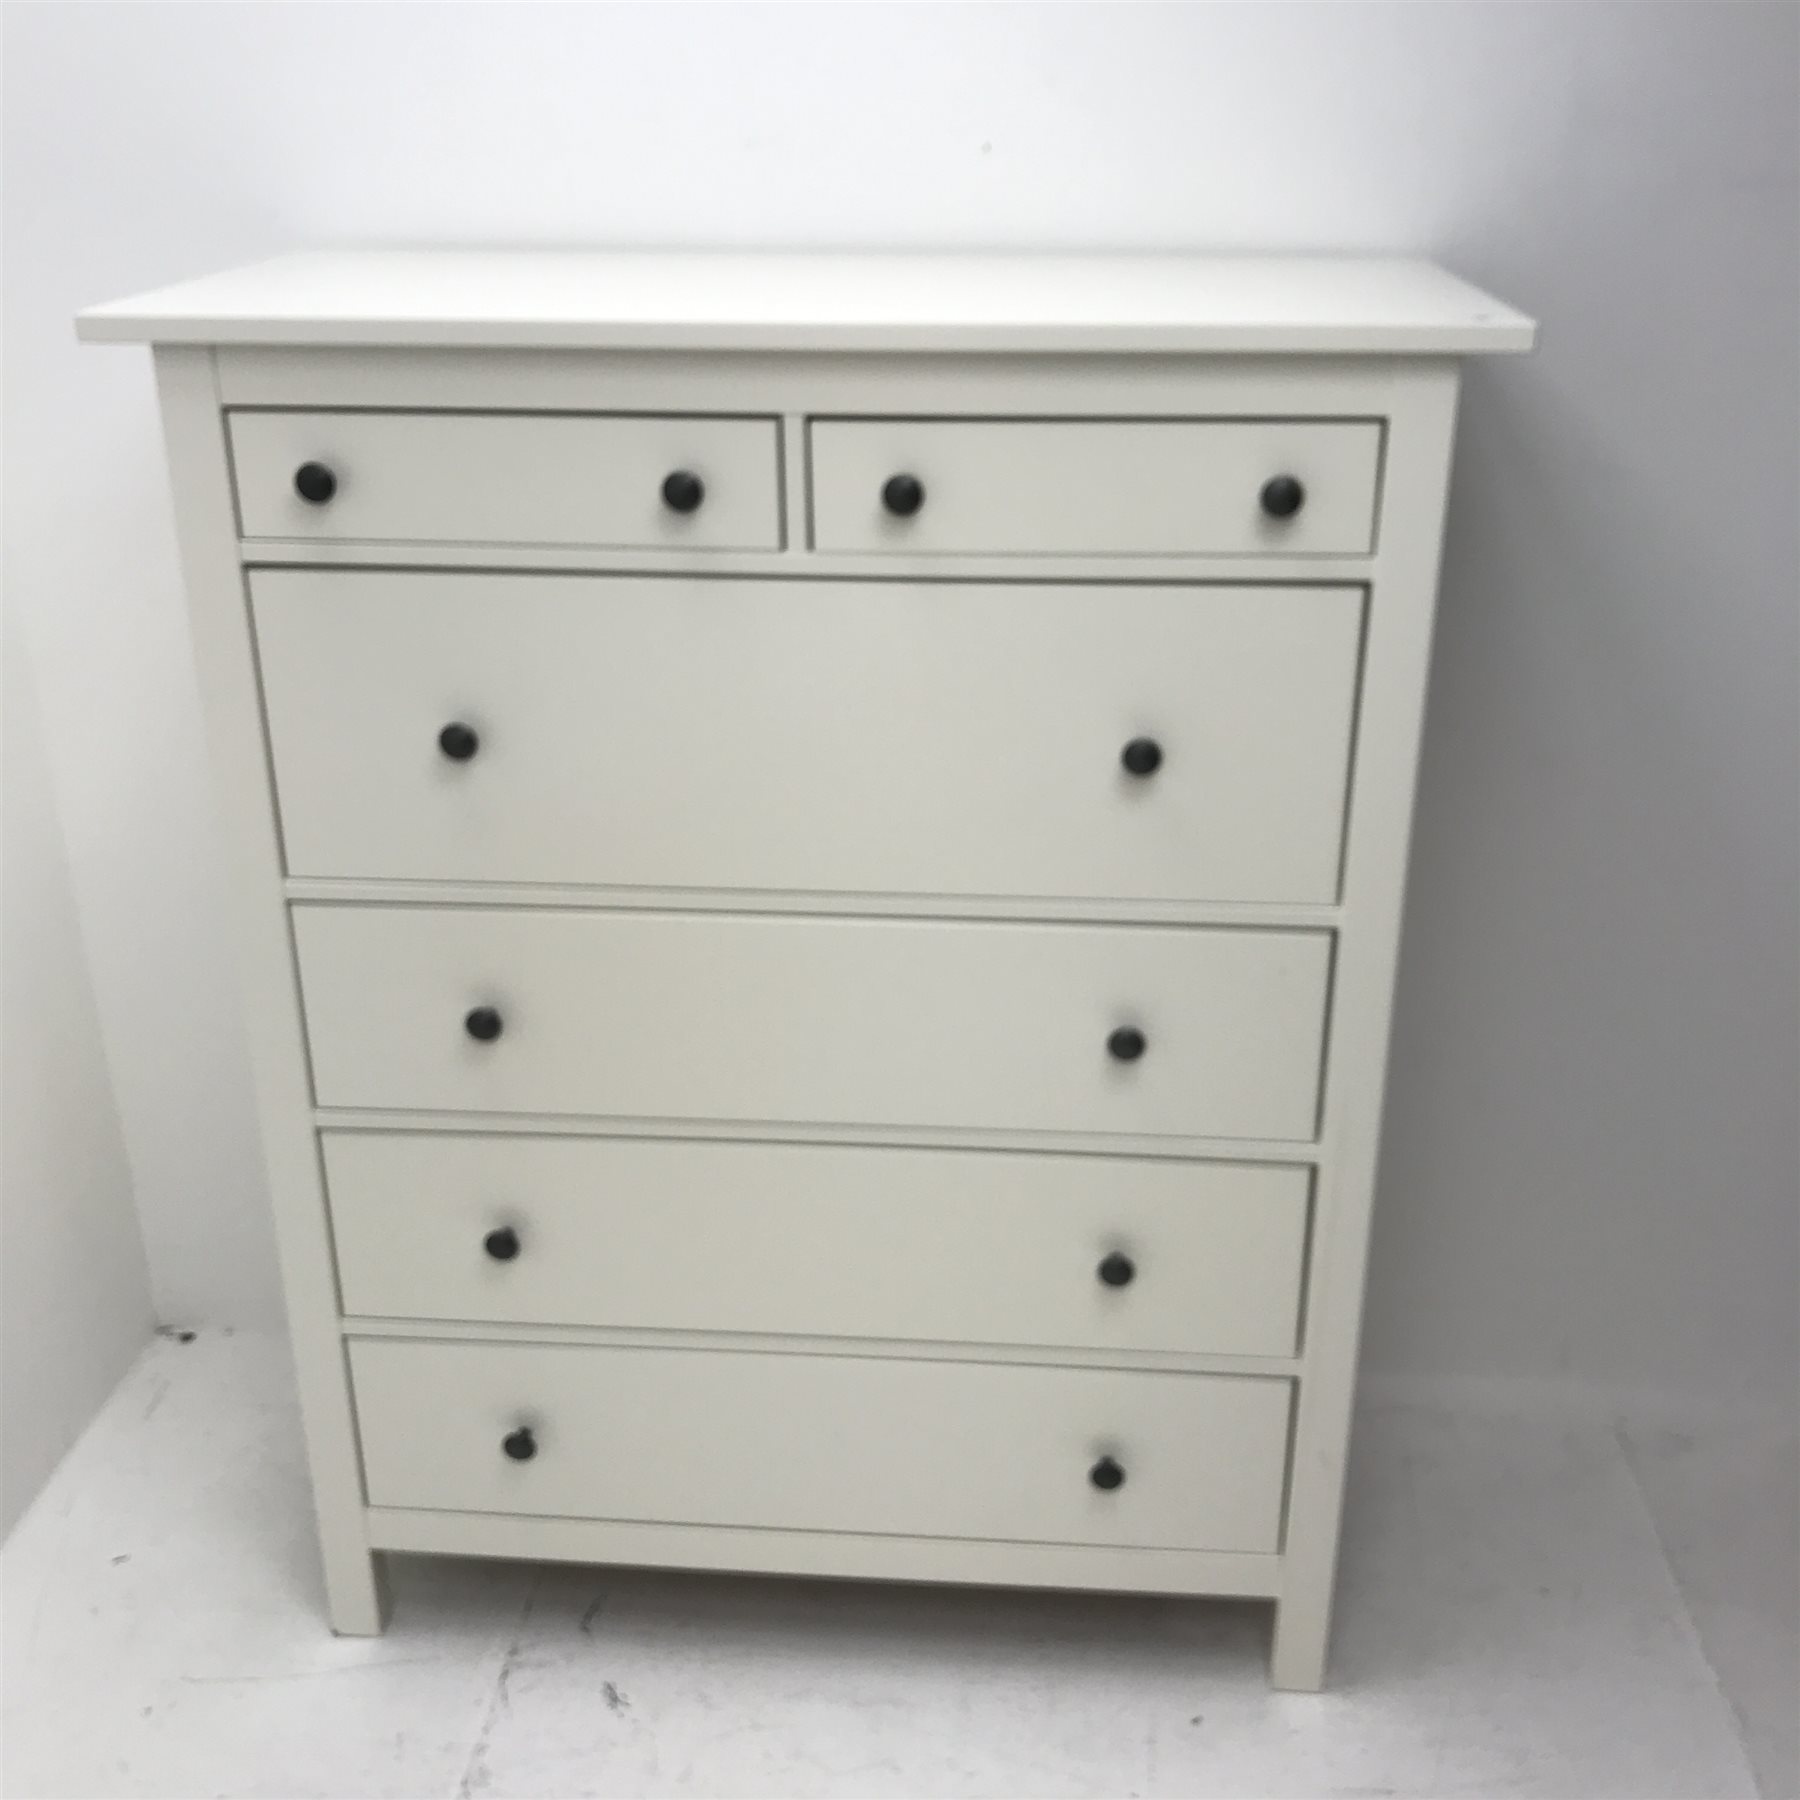 Ikea chest, two short and four graduating drawers, white painted finish, stile supports, W111cm, H13 - Image 2 of 2